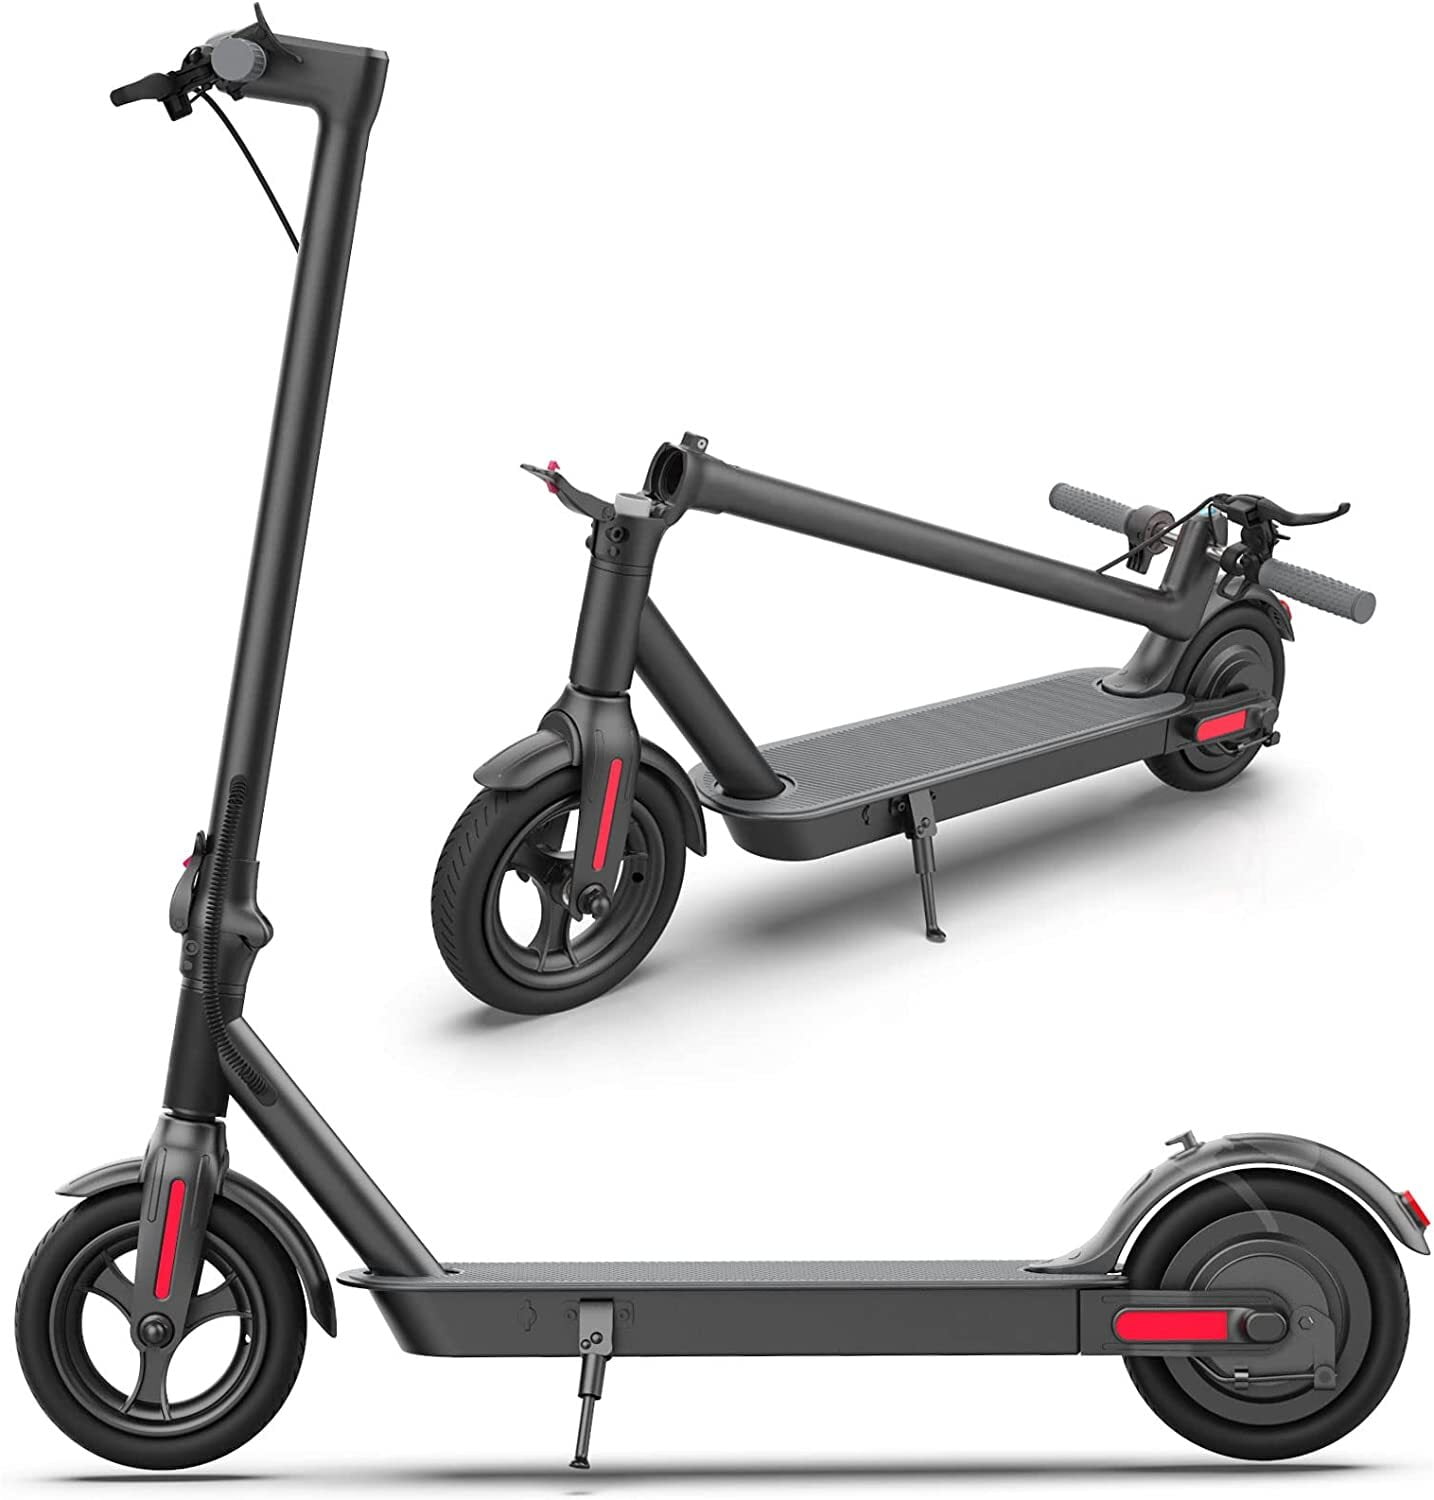  Electric Scooter Upgraded 450W Motor 8.5 Solid Tires Up to 17  Miles Long Range for Adults - 19 Mph Max Speed,Smart APP,Dual Brake  System,Foldable Commuter E Scooter : Sports 